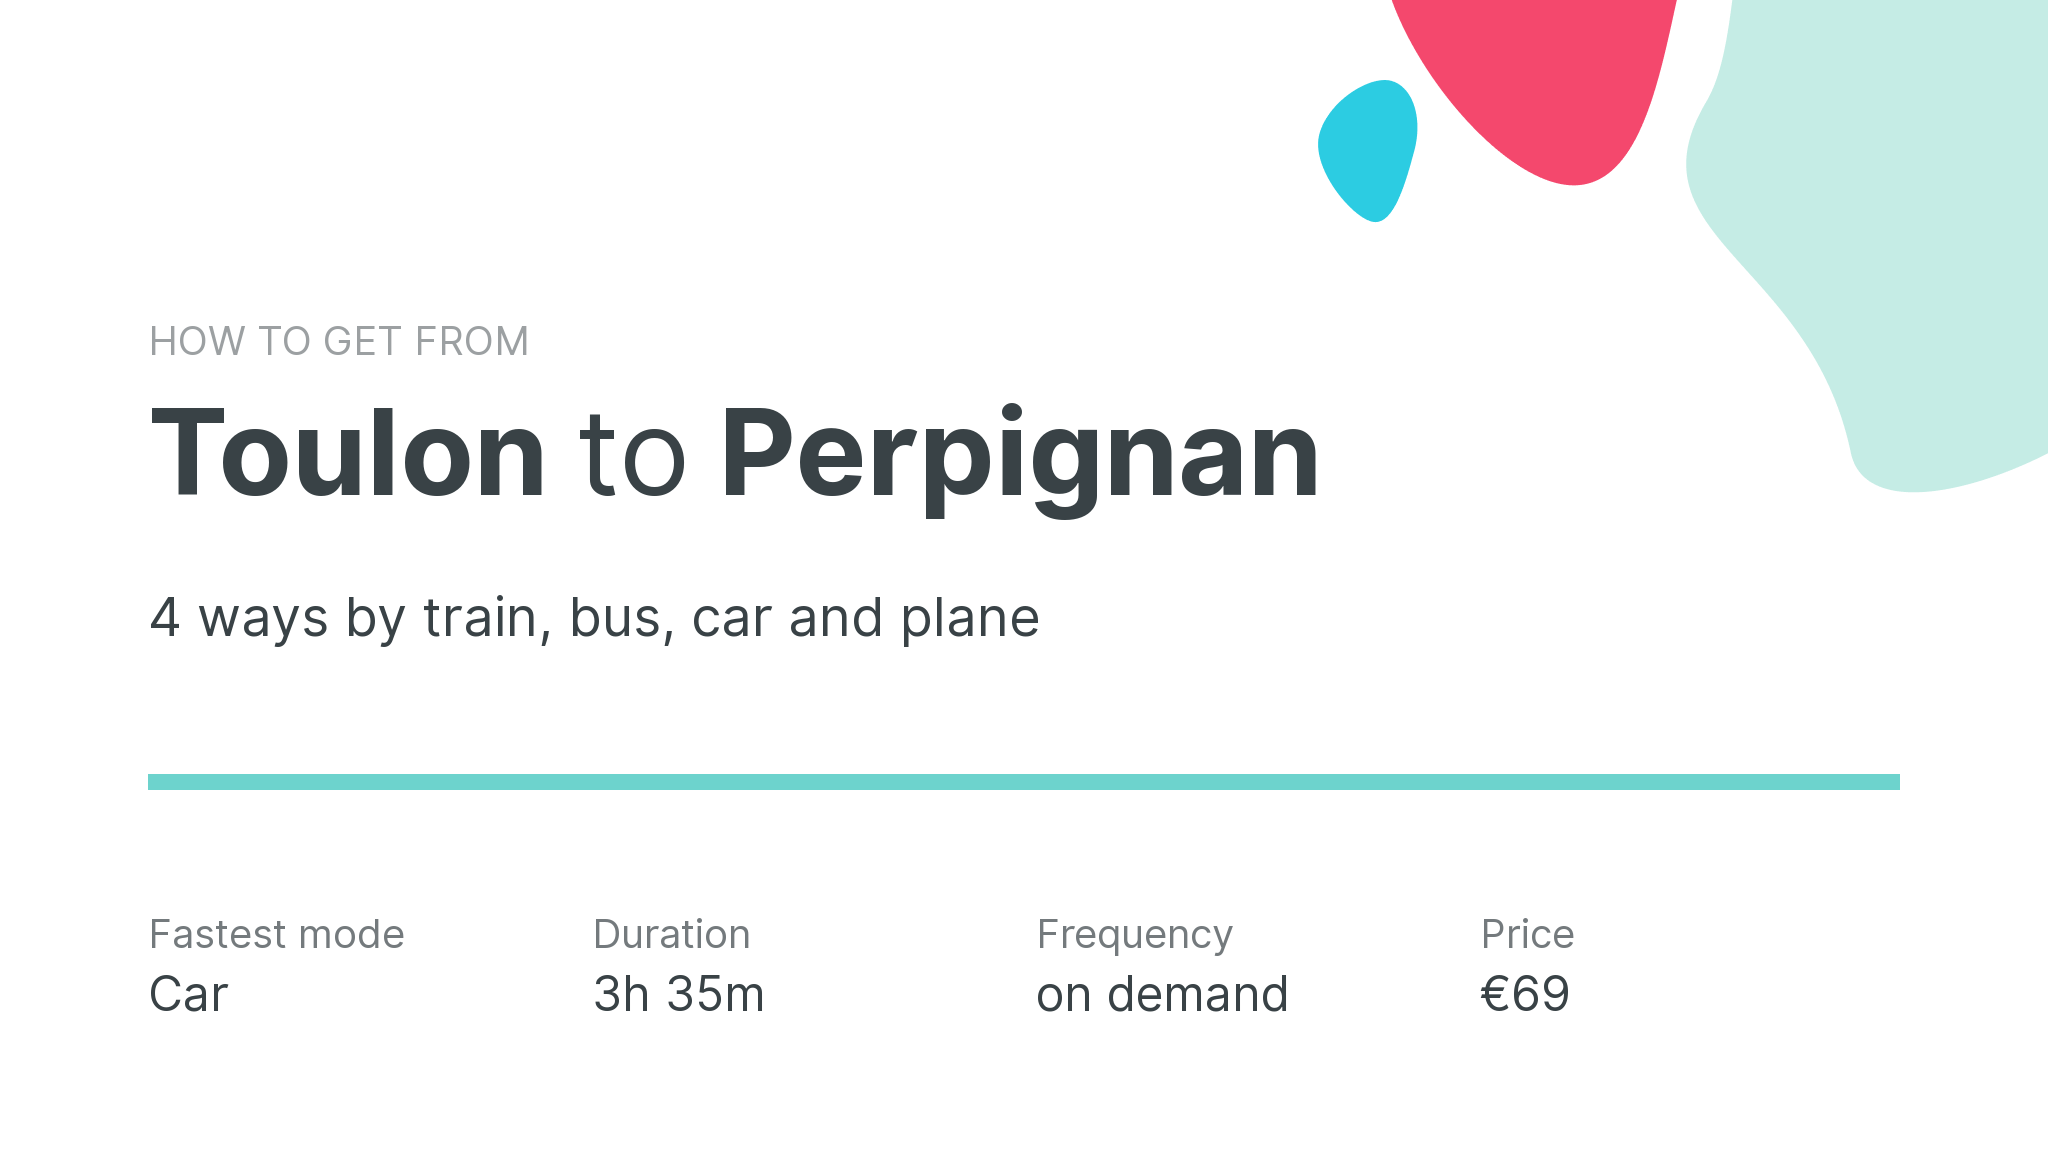 How do I get from Toulon to Perpignan